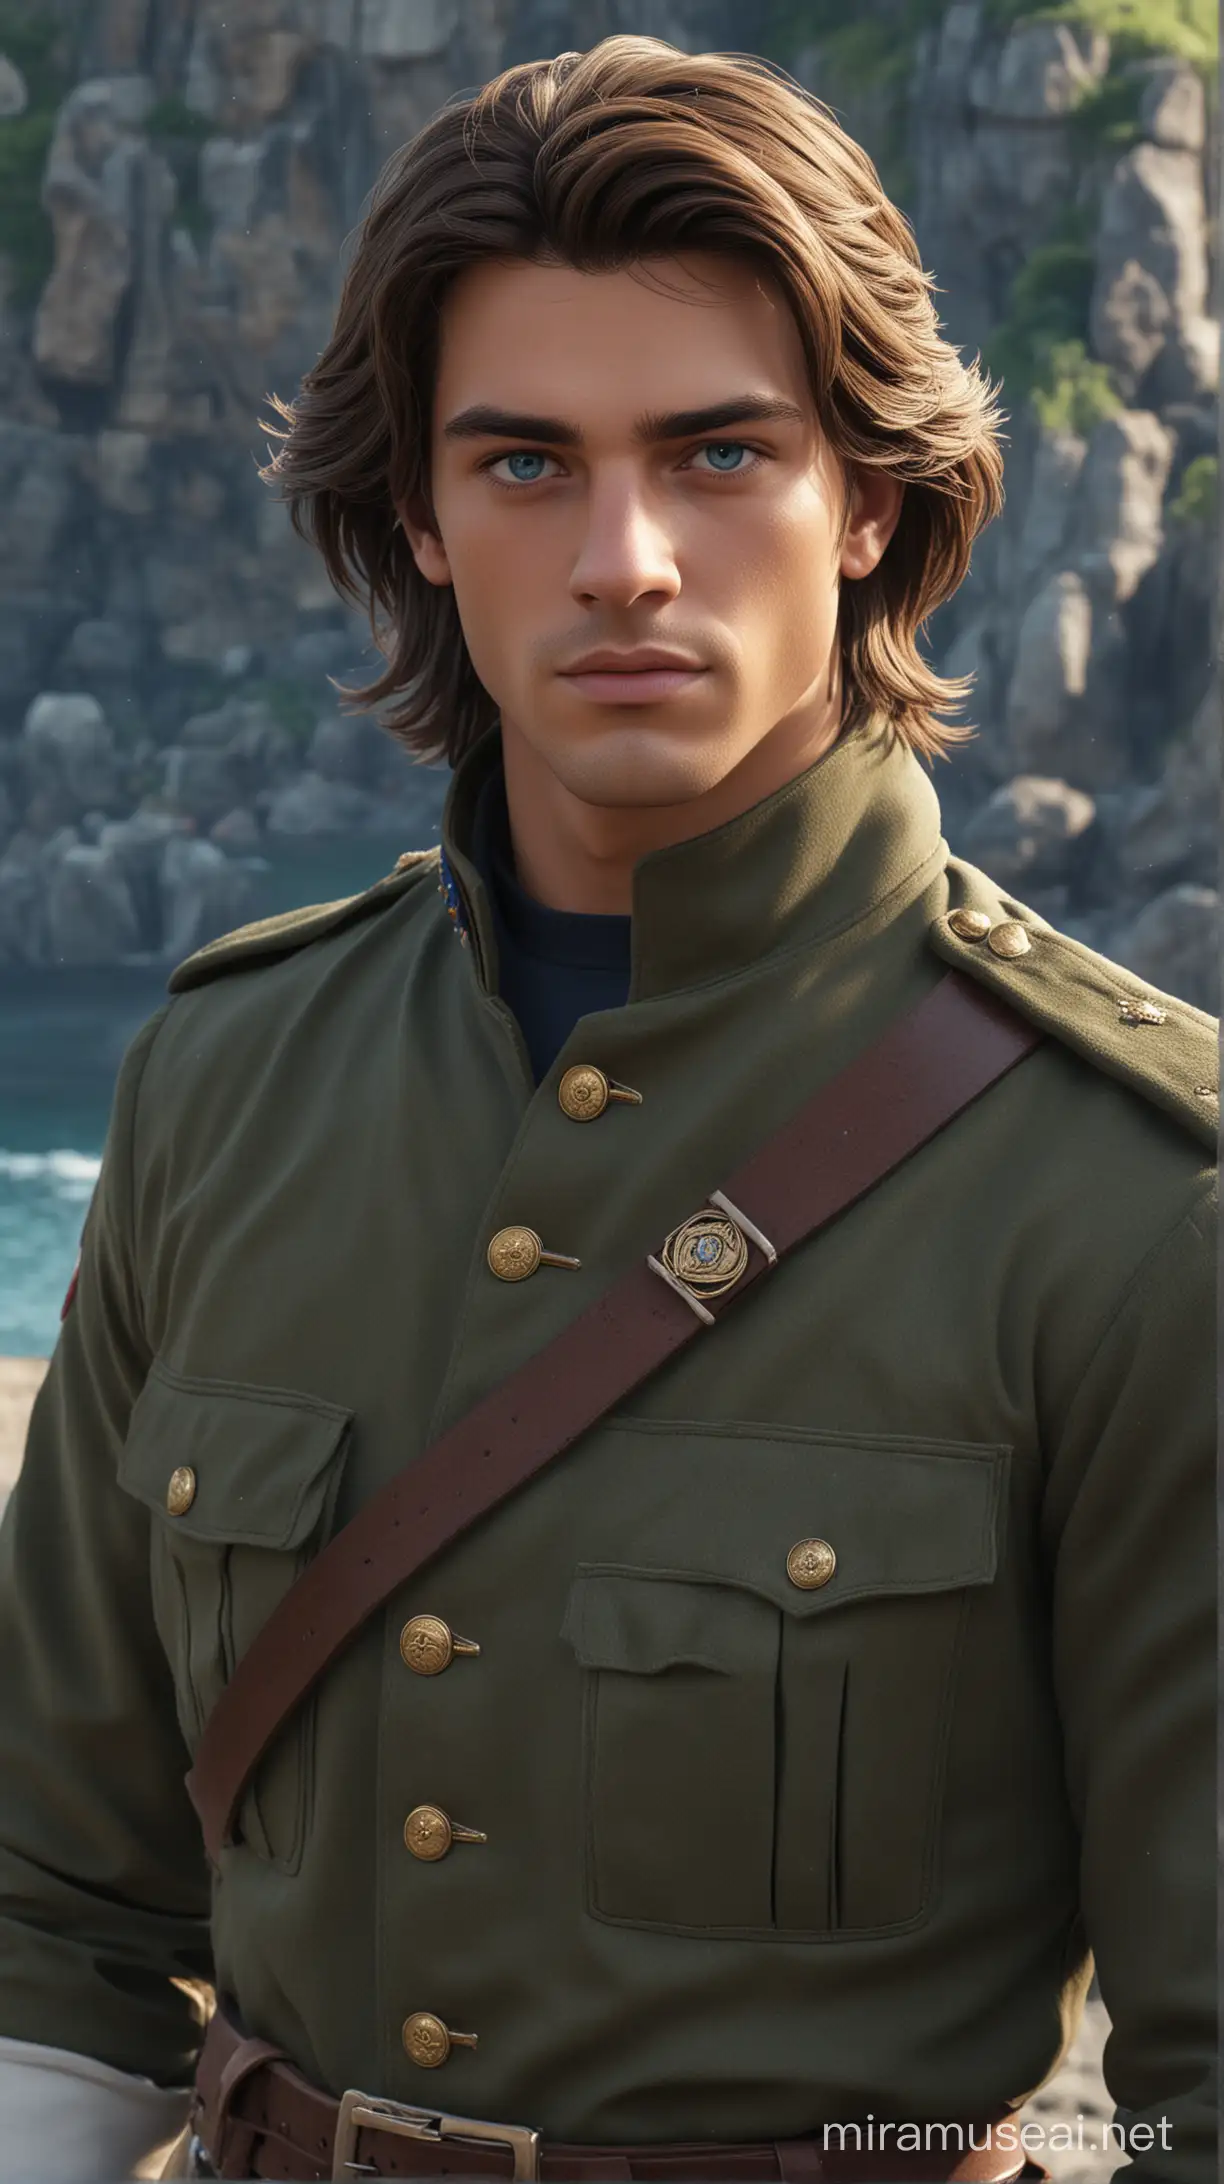 Disney Prince Adam in Military Camouflage Uniform in Natural Setting